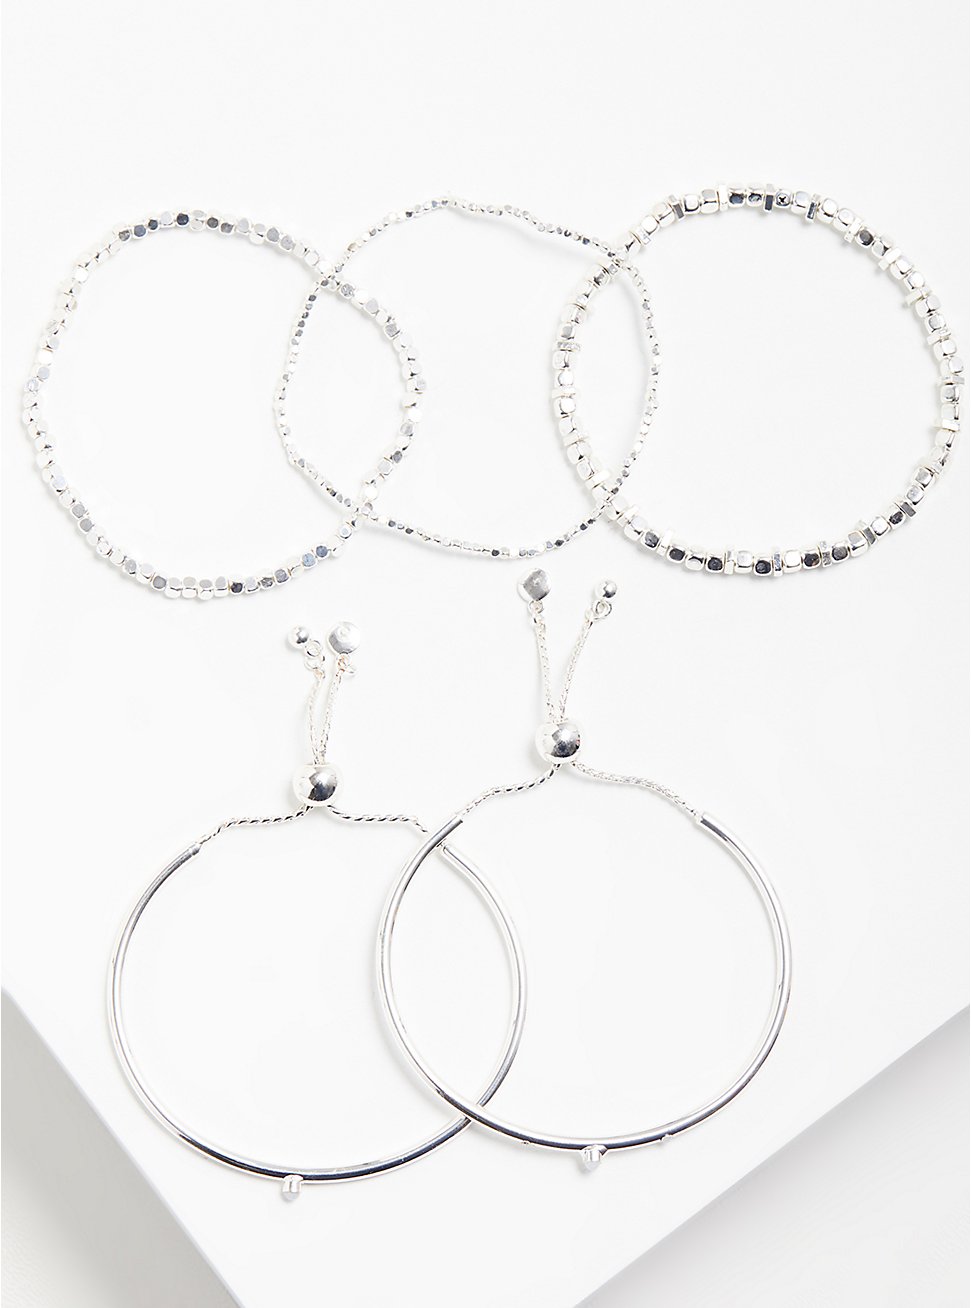 Pull Clasp Bracelet Set of 5 - Silver Tone, SILVER, hi-res